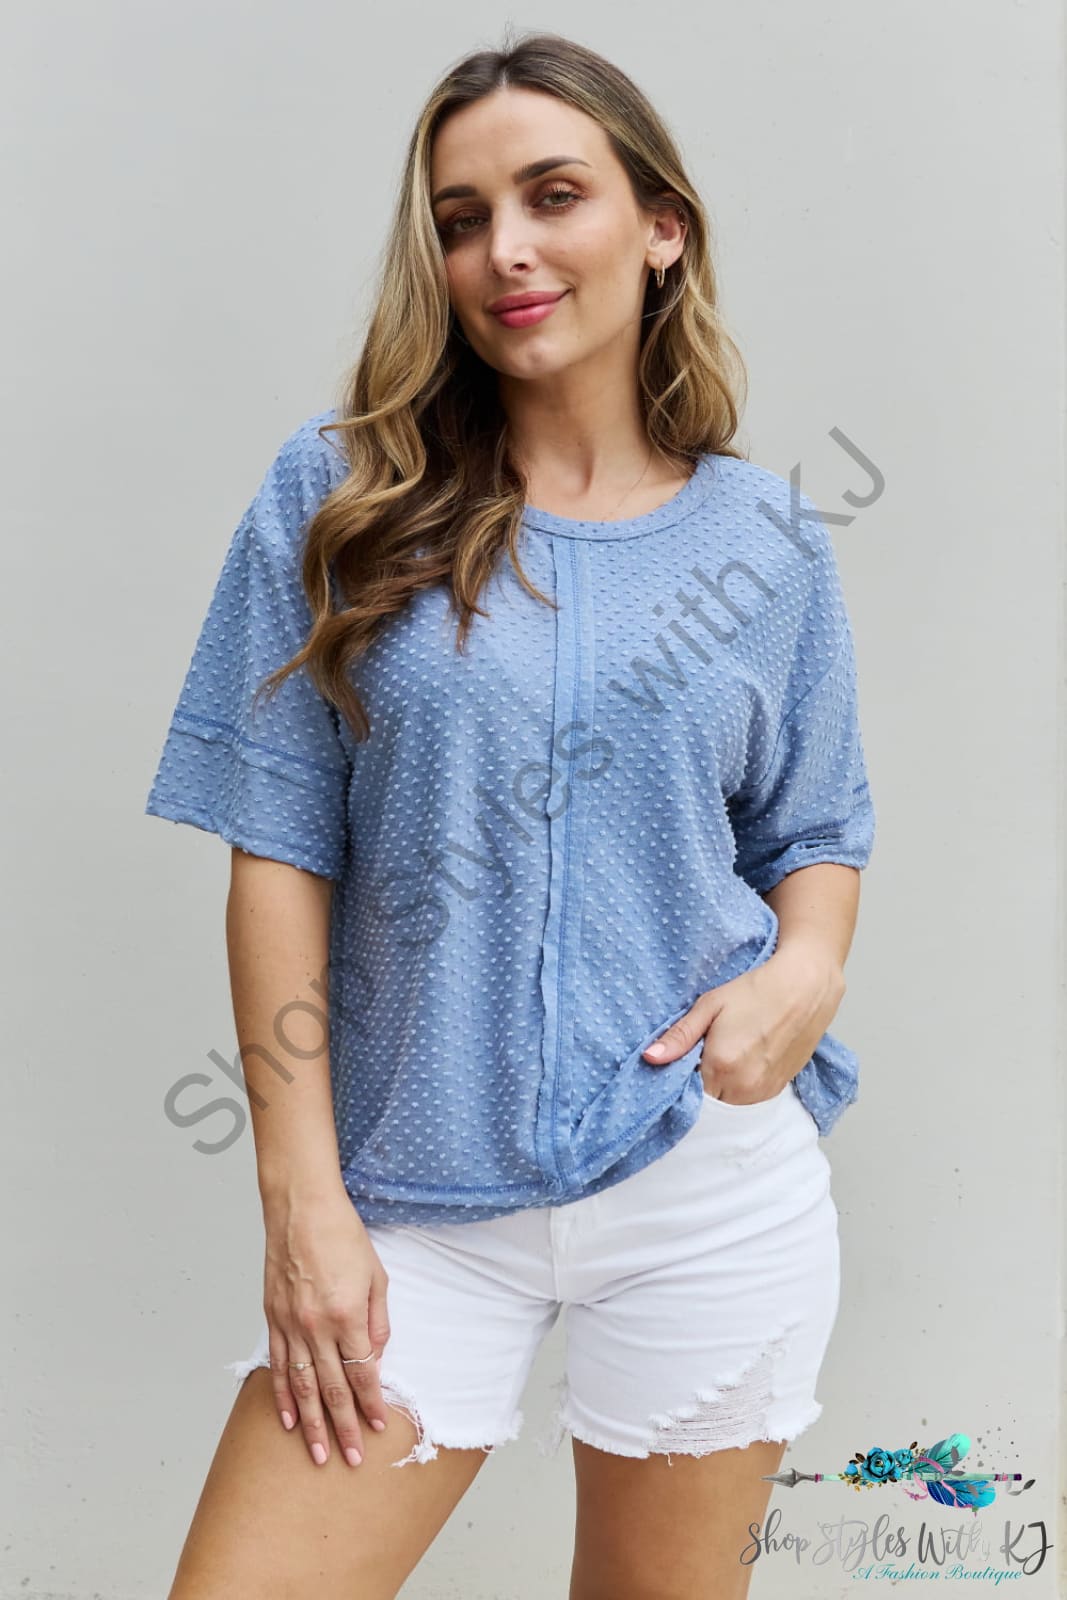 Cater 2 You Swiss Dot Reverse Stitch Short Sleeve Top Pastel Blue / S Shirts & Tops